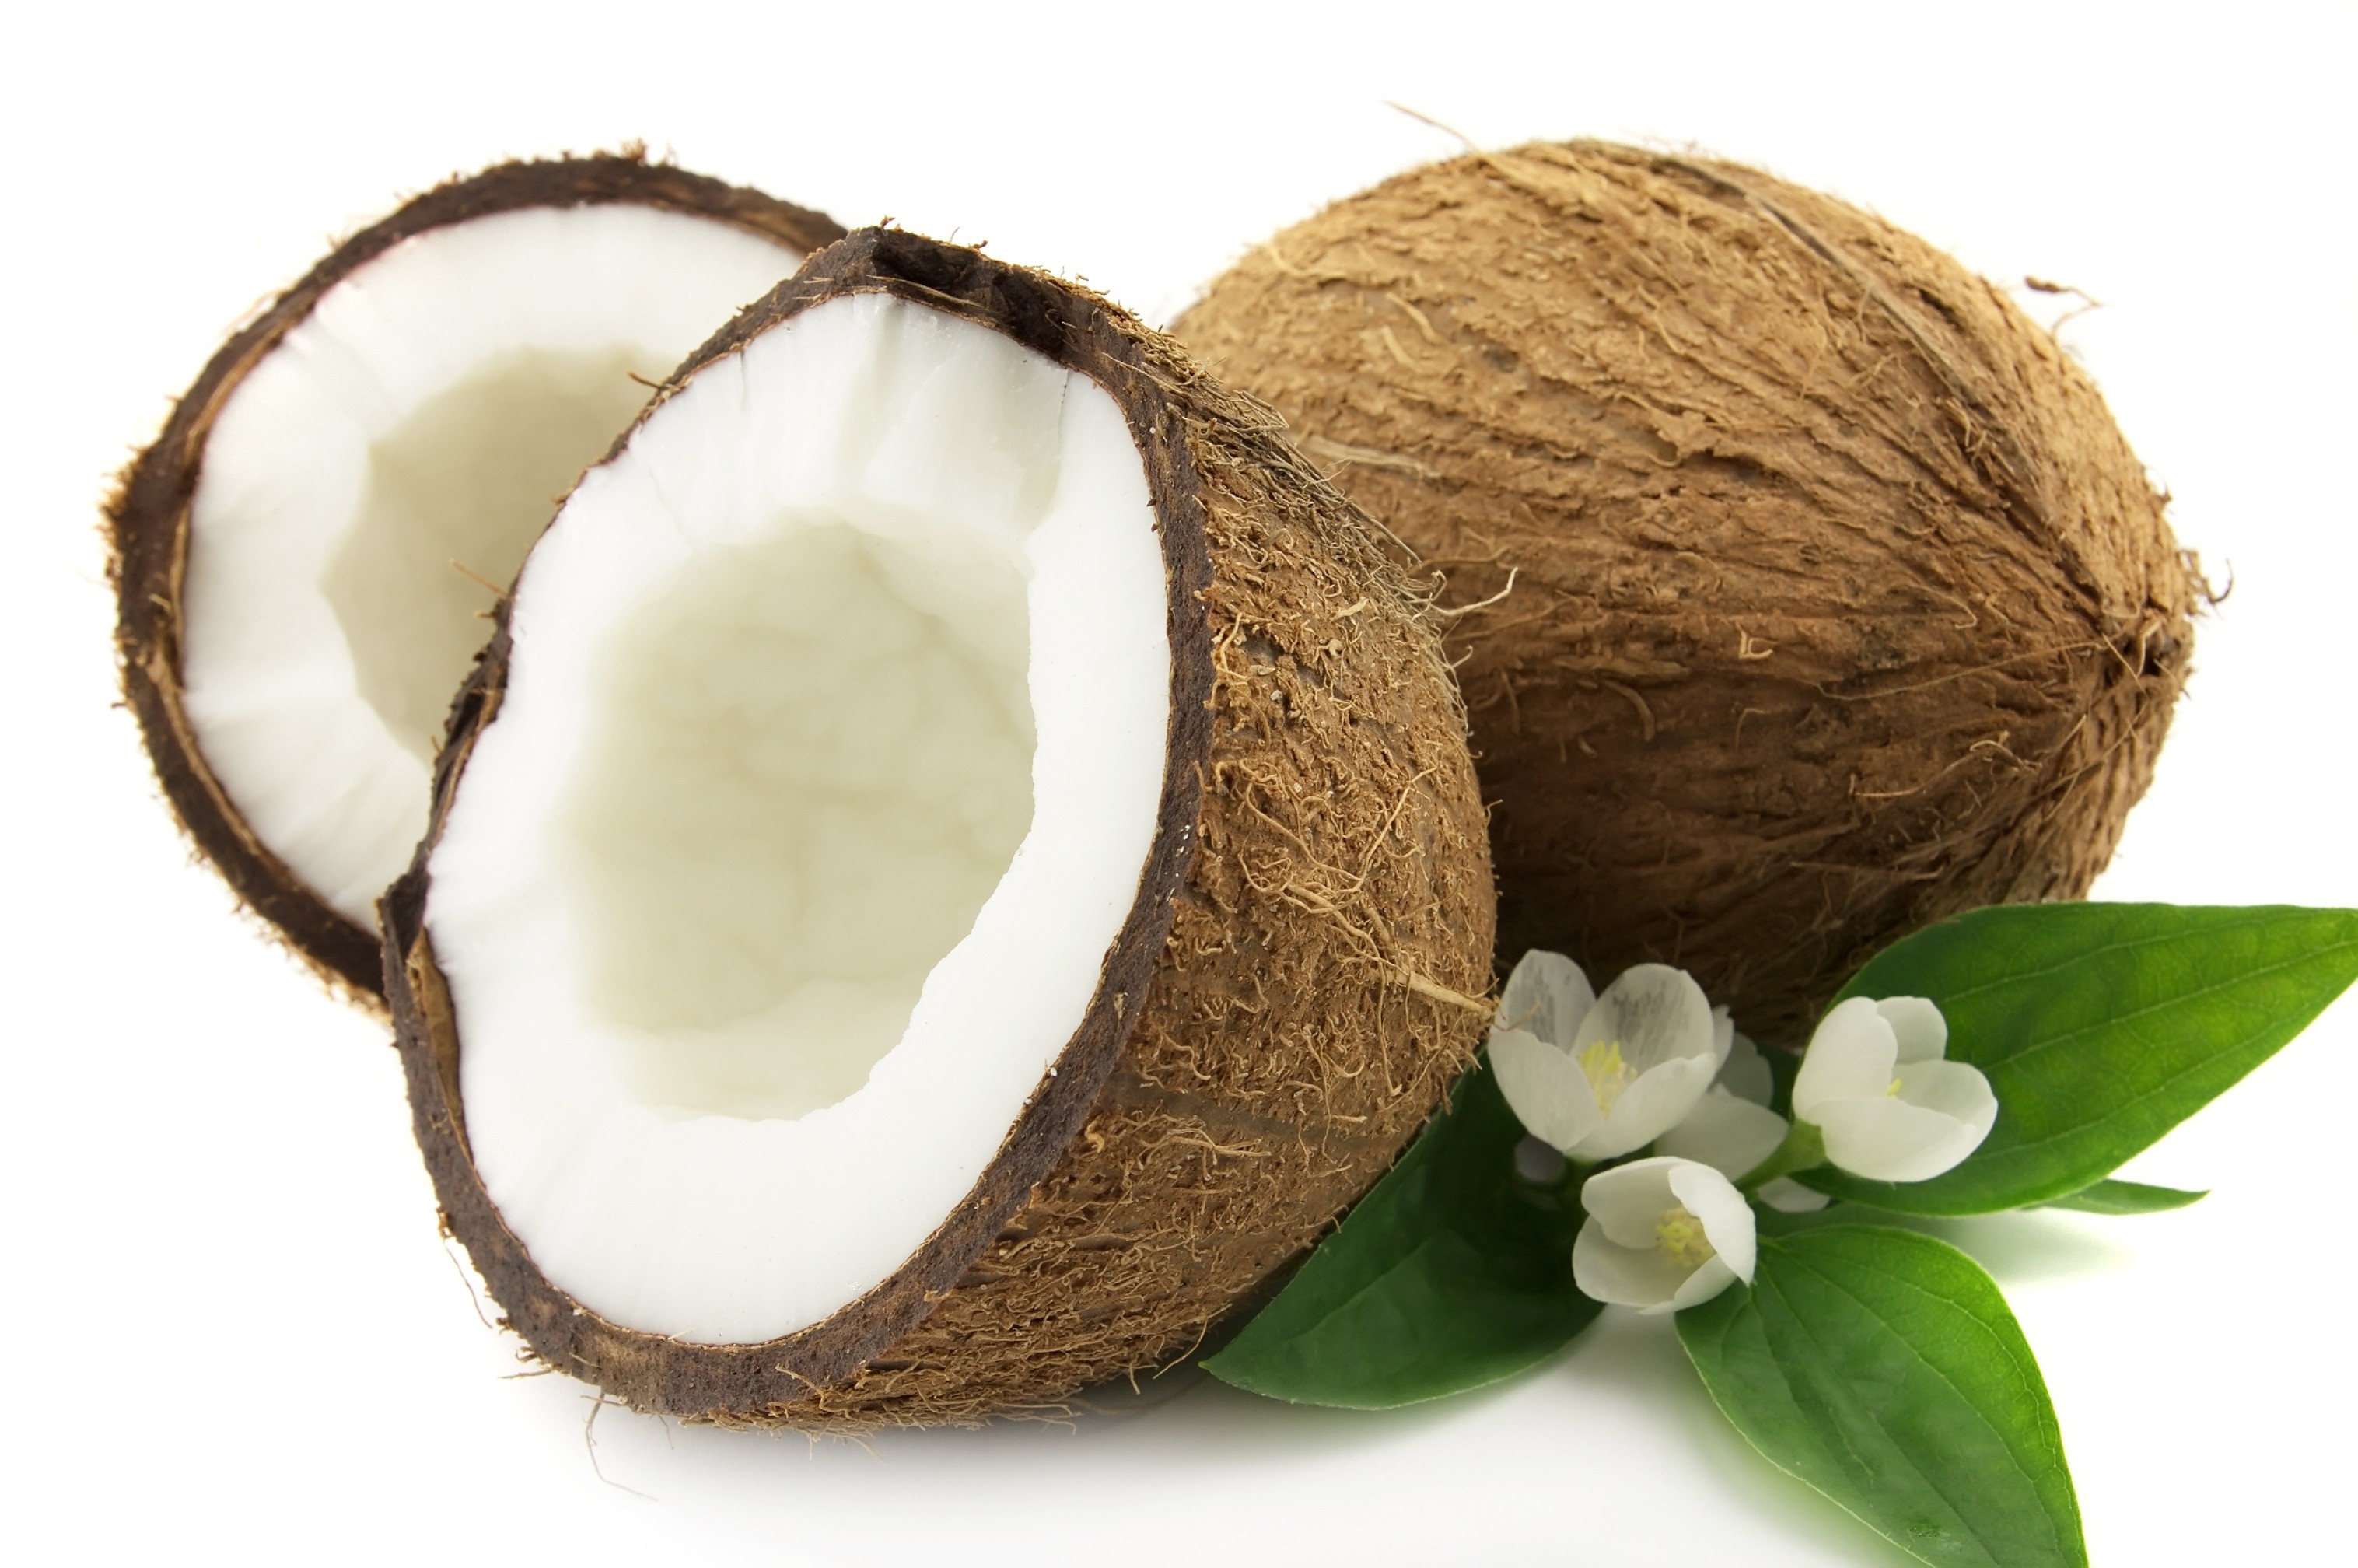 Coconut Imported From 8 Countries | Financial Tribune